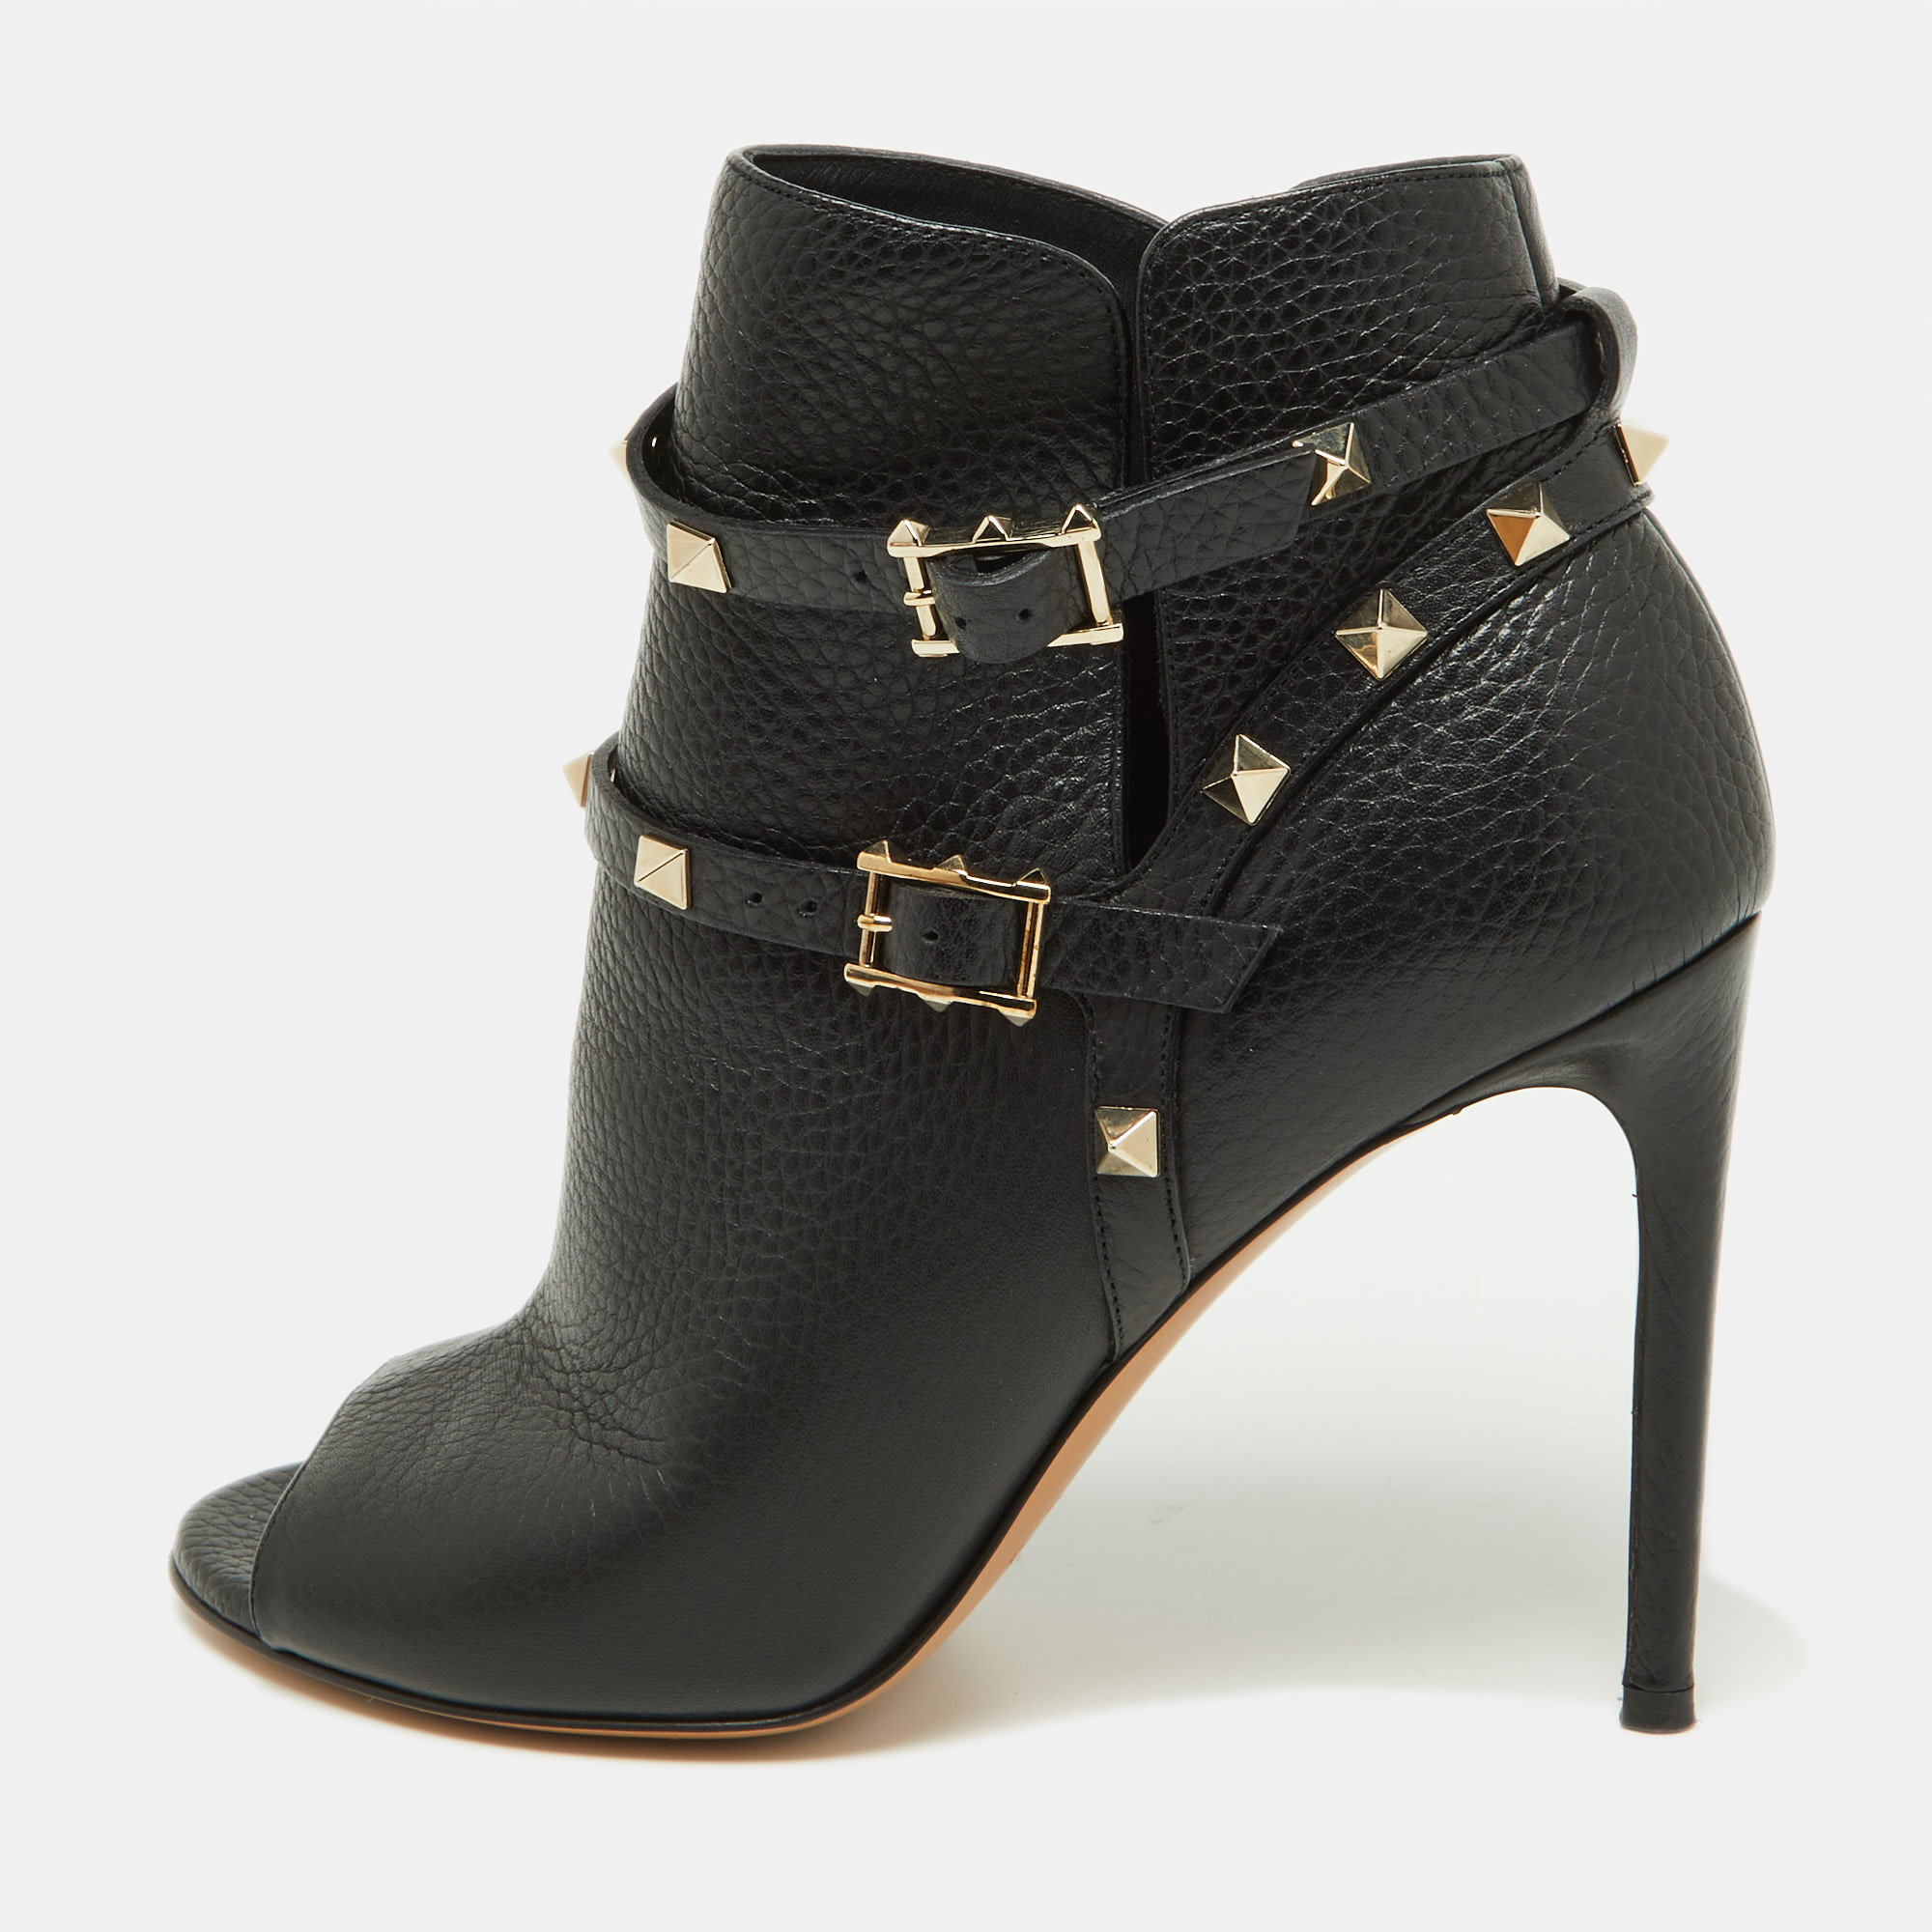 Valentino Black Leather Rockstud Open Toe Ankle Boots Size 38